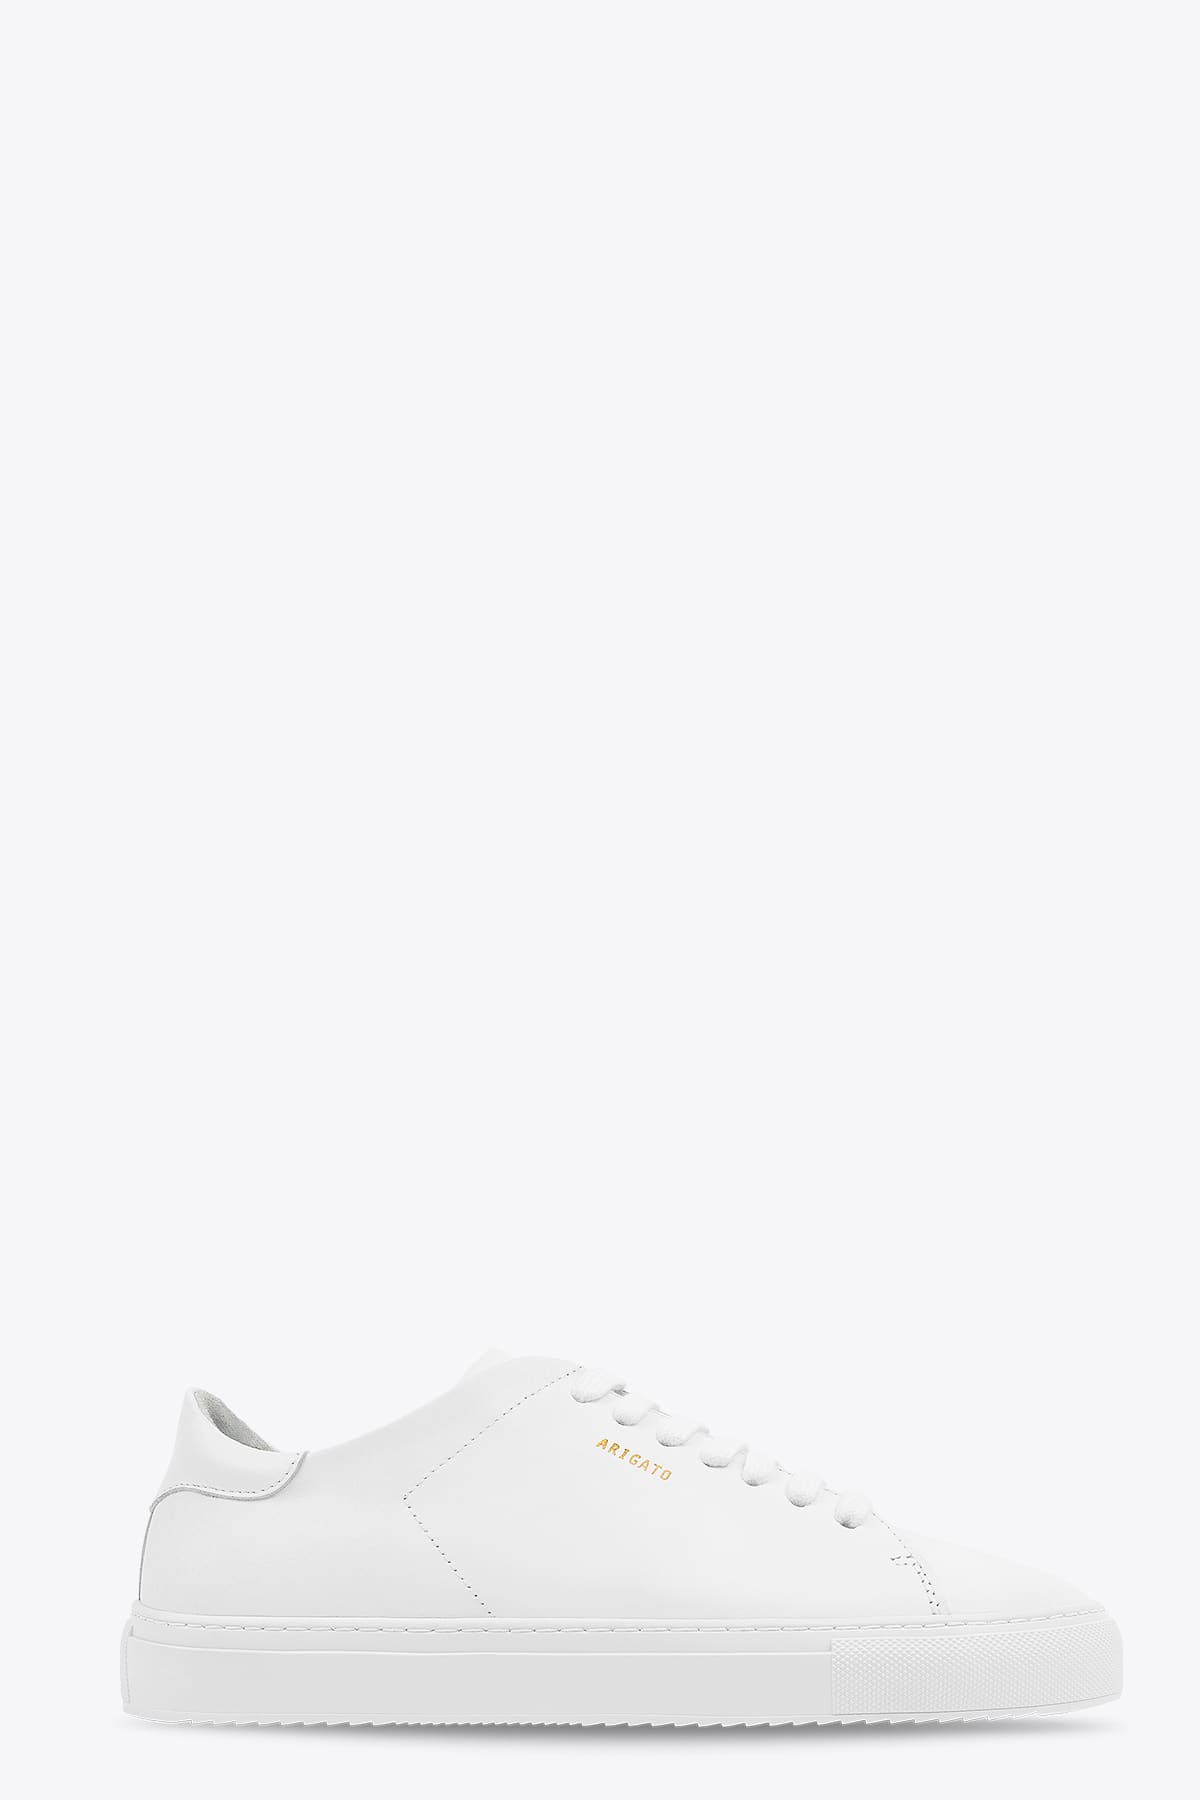 Axel Arigato Clean 90 White leather low top lace-up sneaker - Clean 90